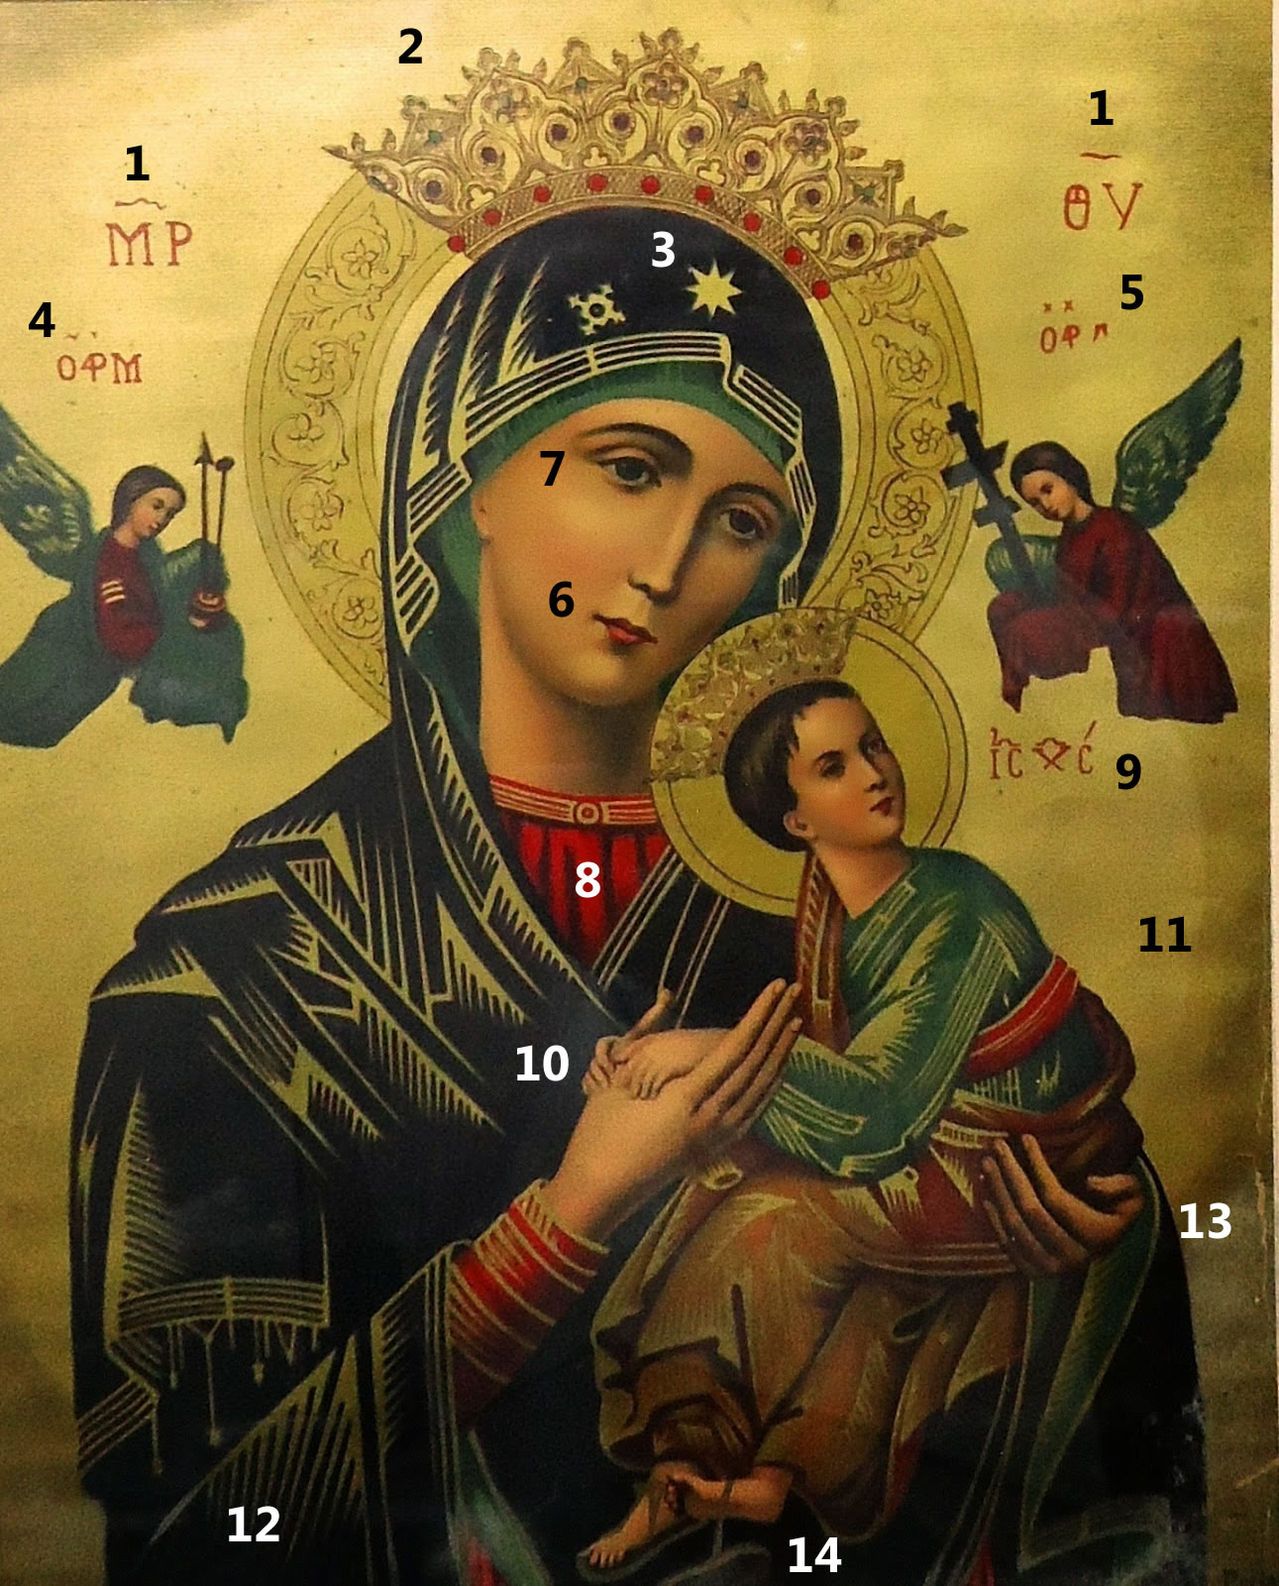 Our Lady of Perpetual Help, Our Lady of Perpetual Help icon meaning, Our Lady of Perpetual help meaning